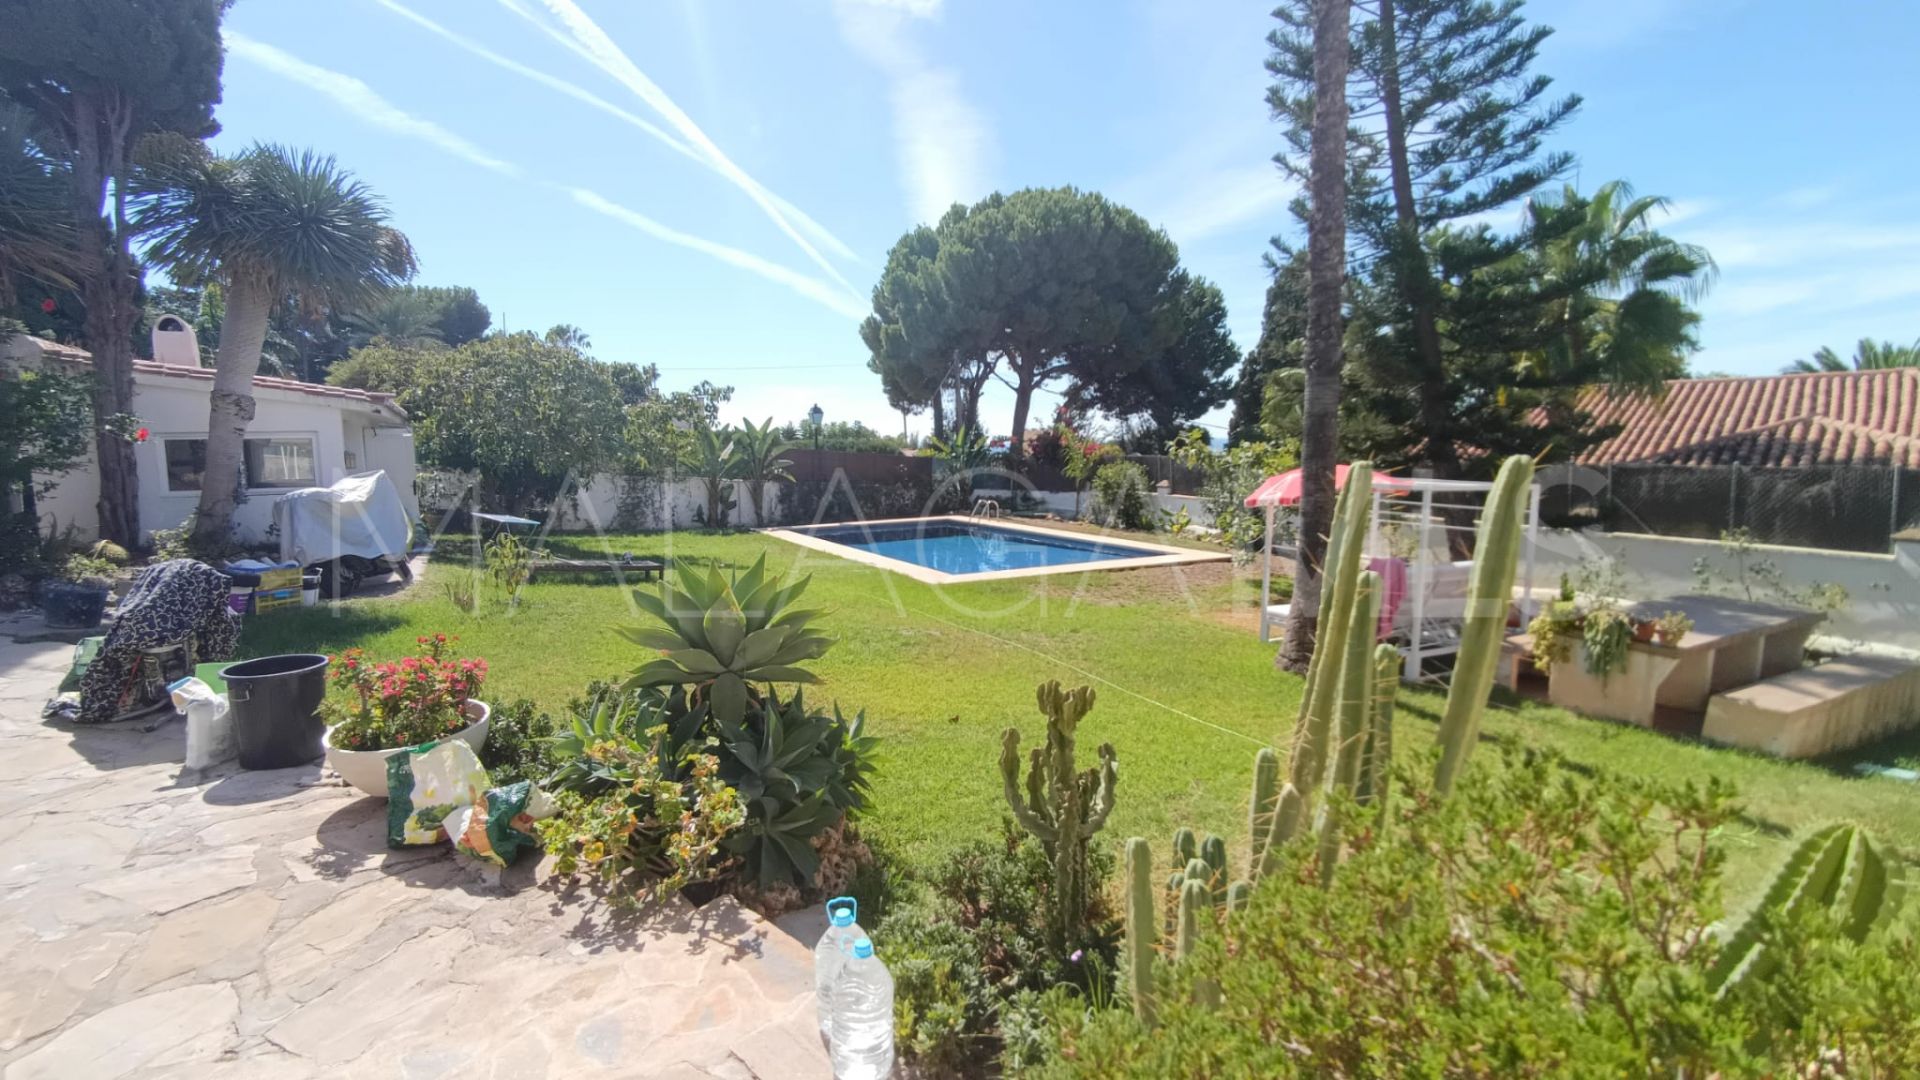 For sale El Real Panorama villa with 3 bedrooms